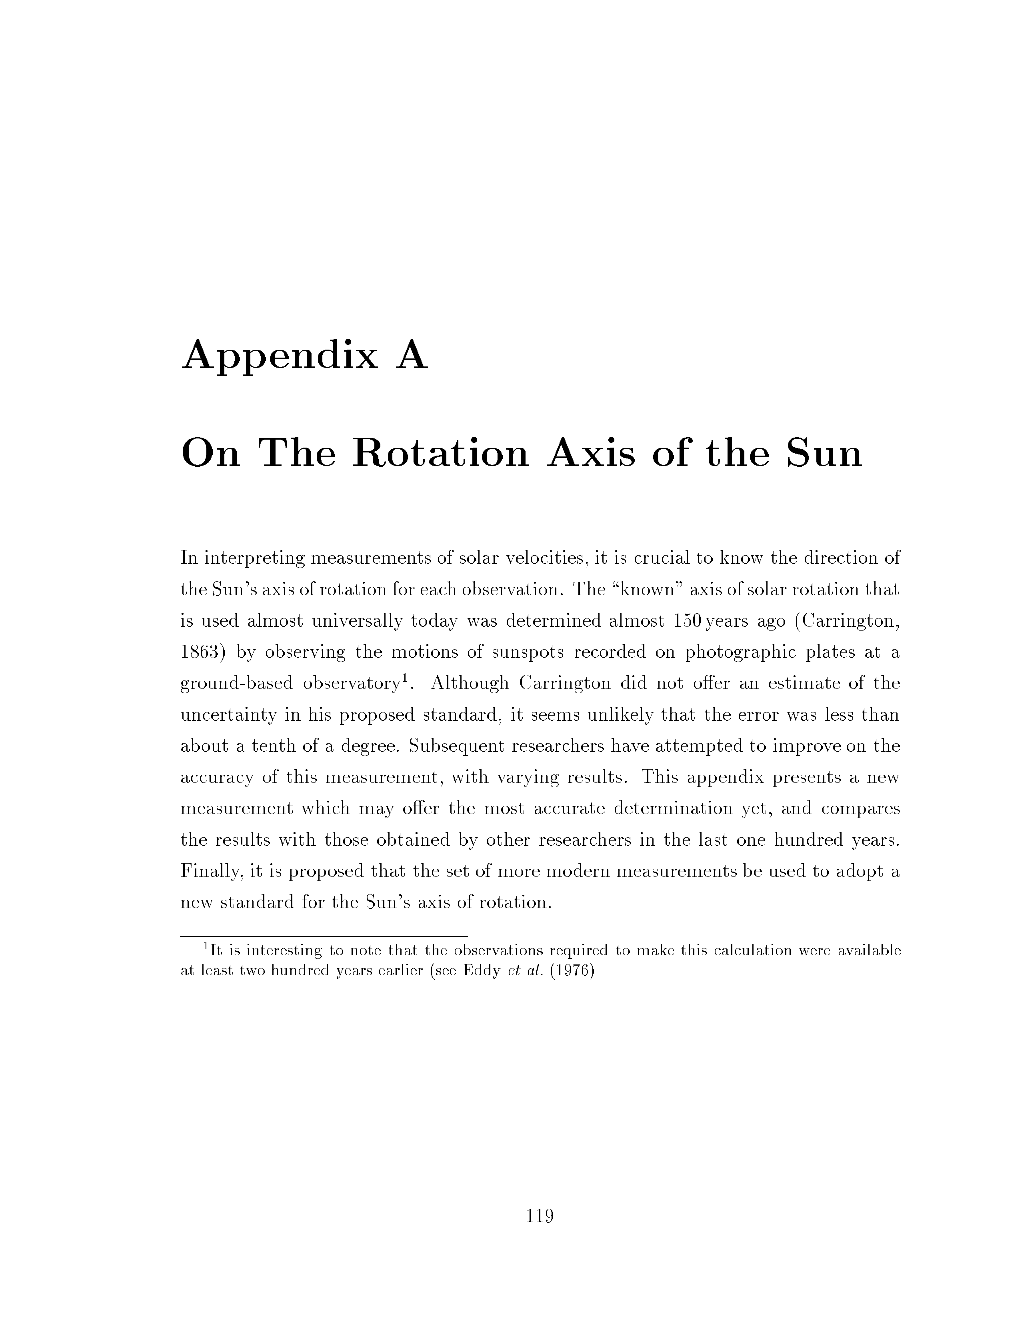 Appendix a on the Rotation Axis of The